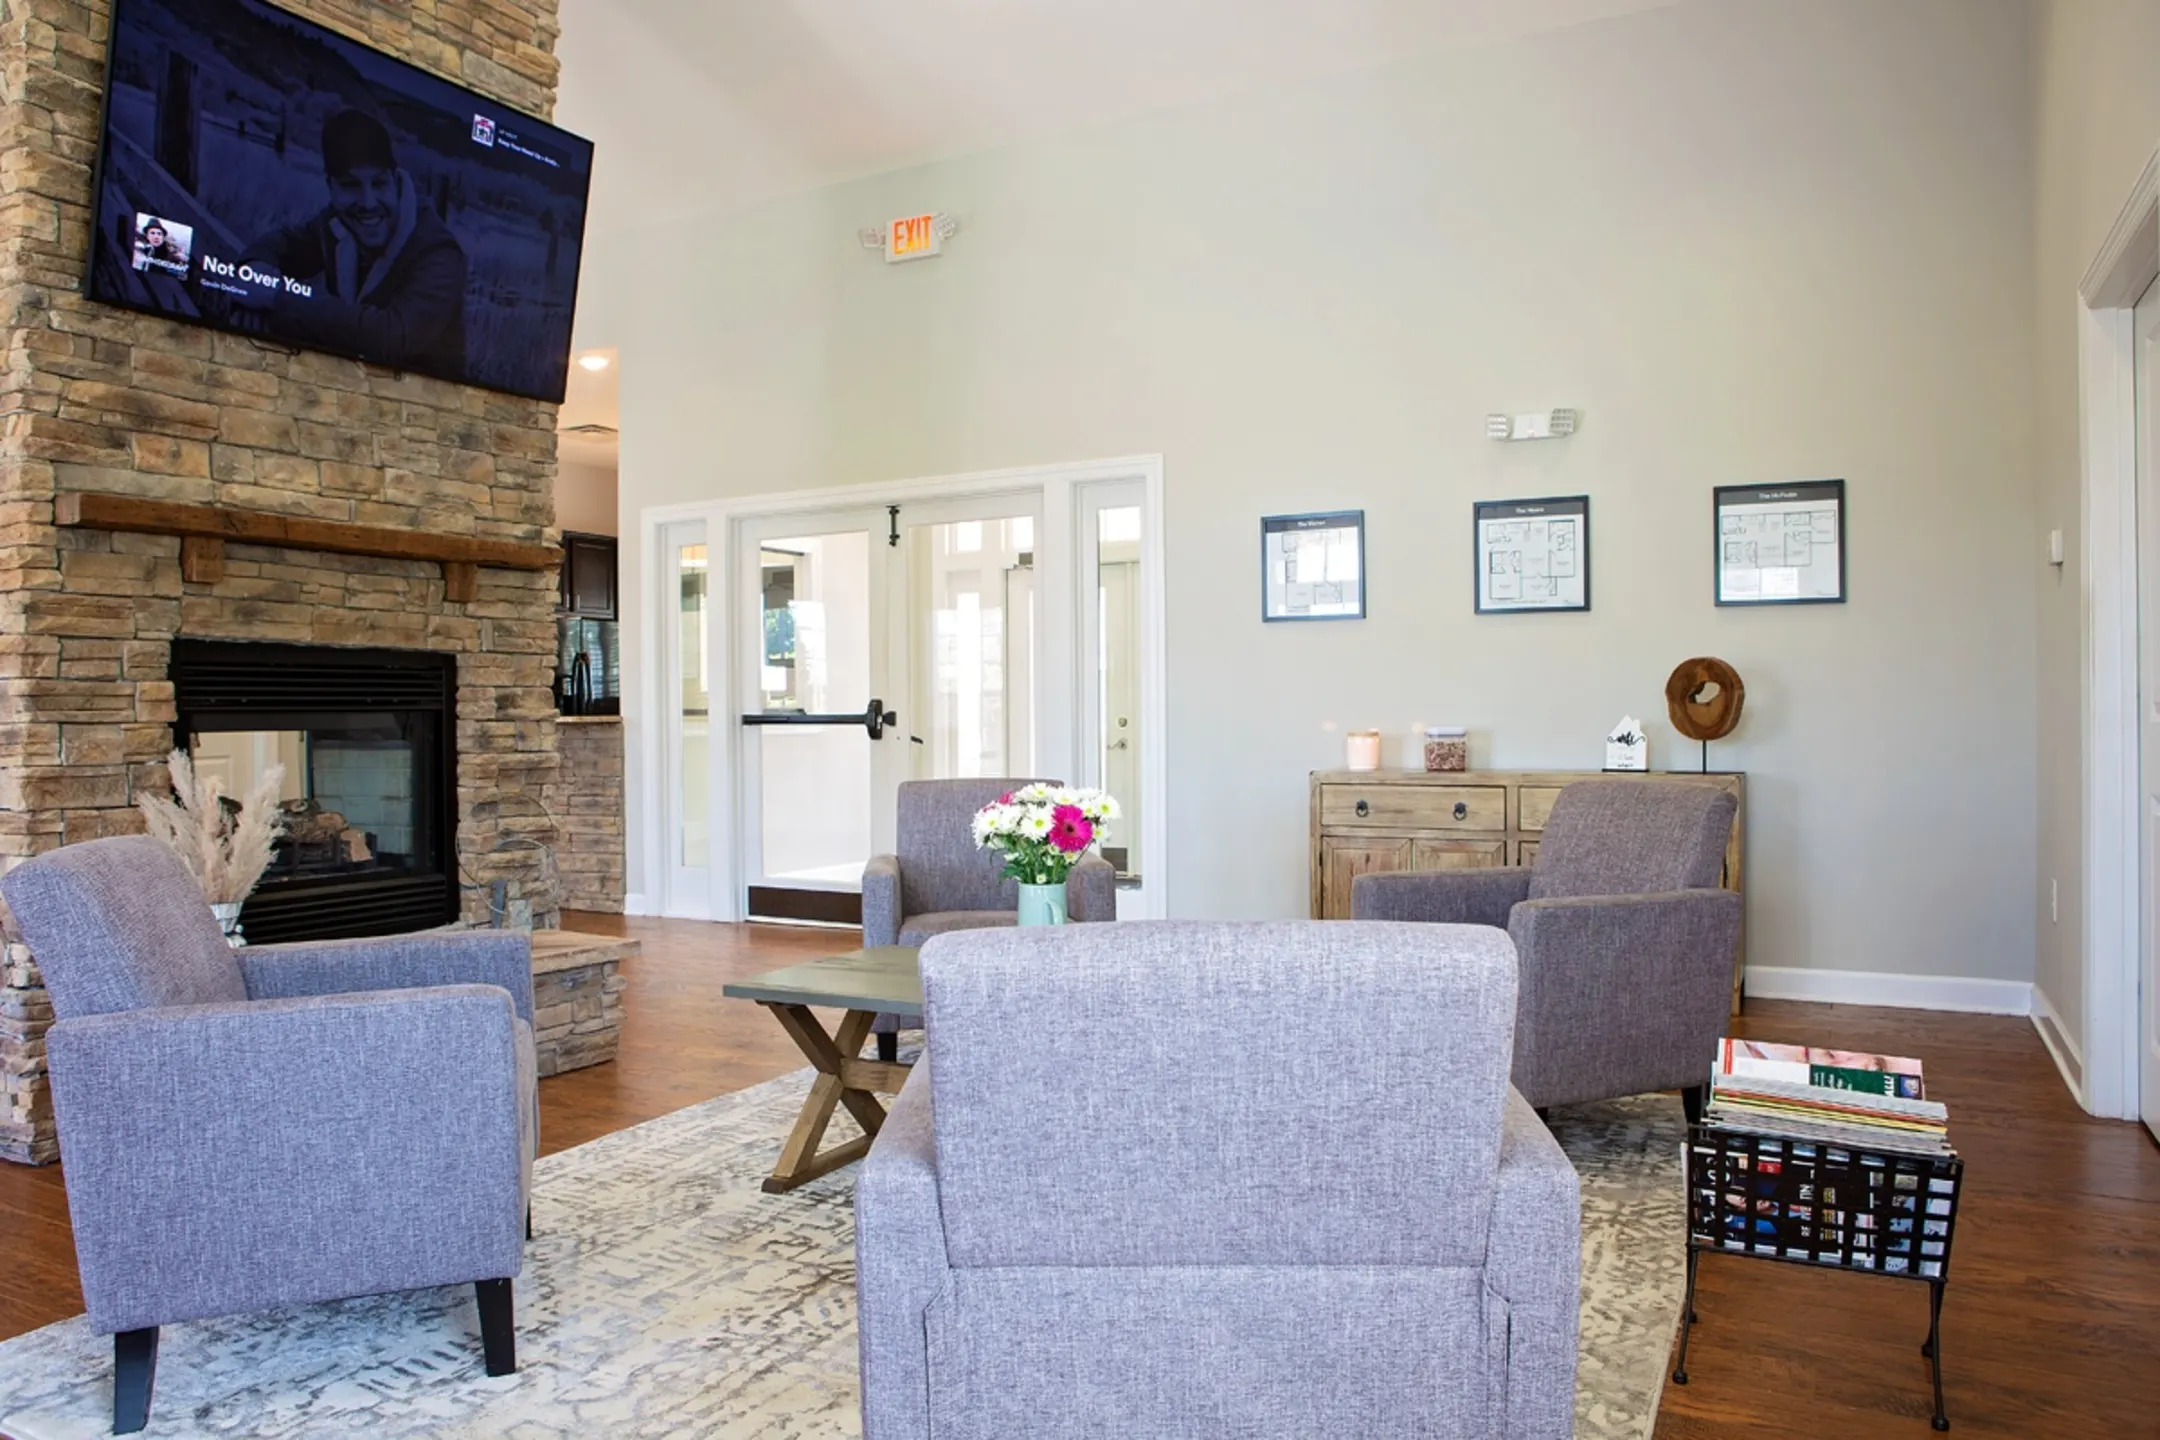 Living Room - Cumberland Trace Village Apartments - Bowling Green, KY